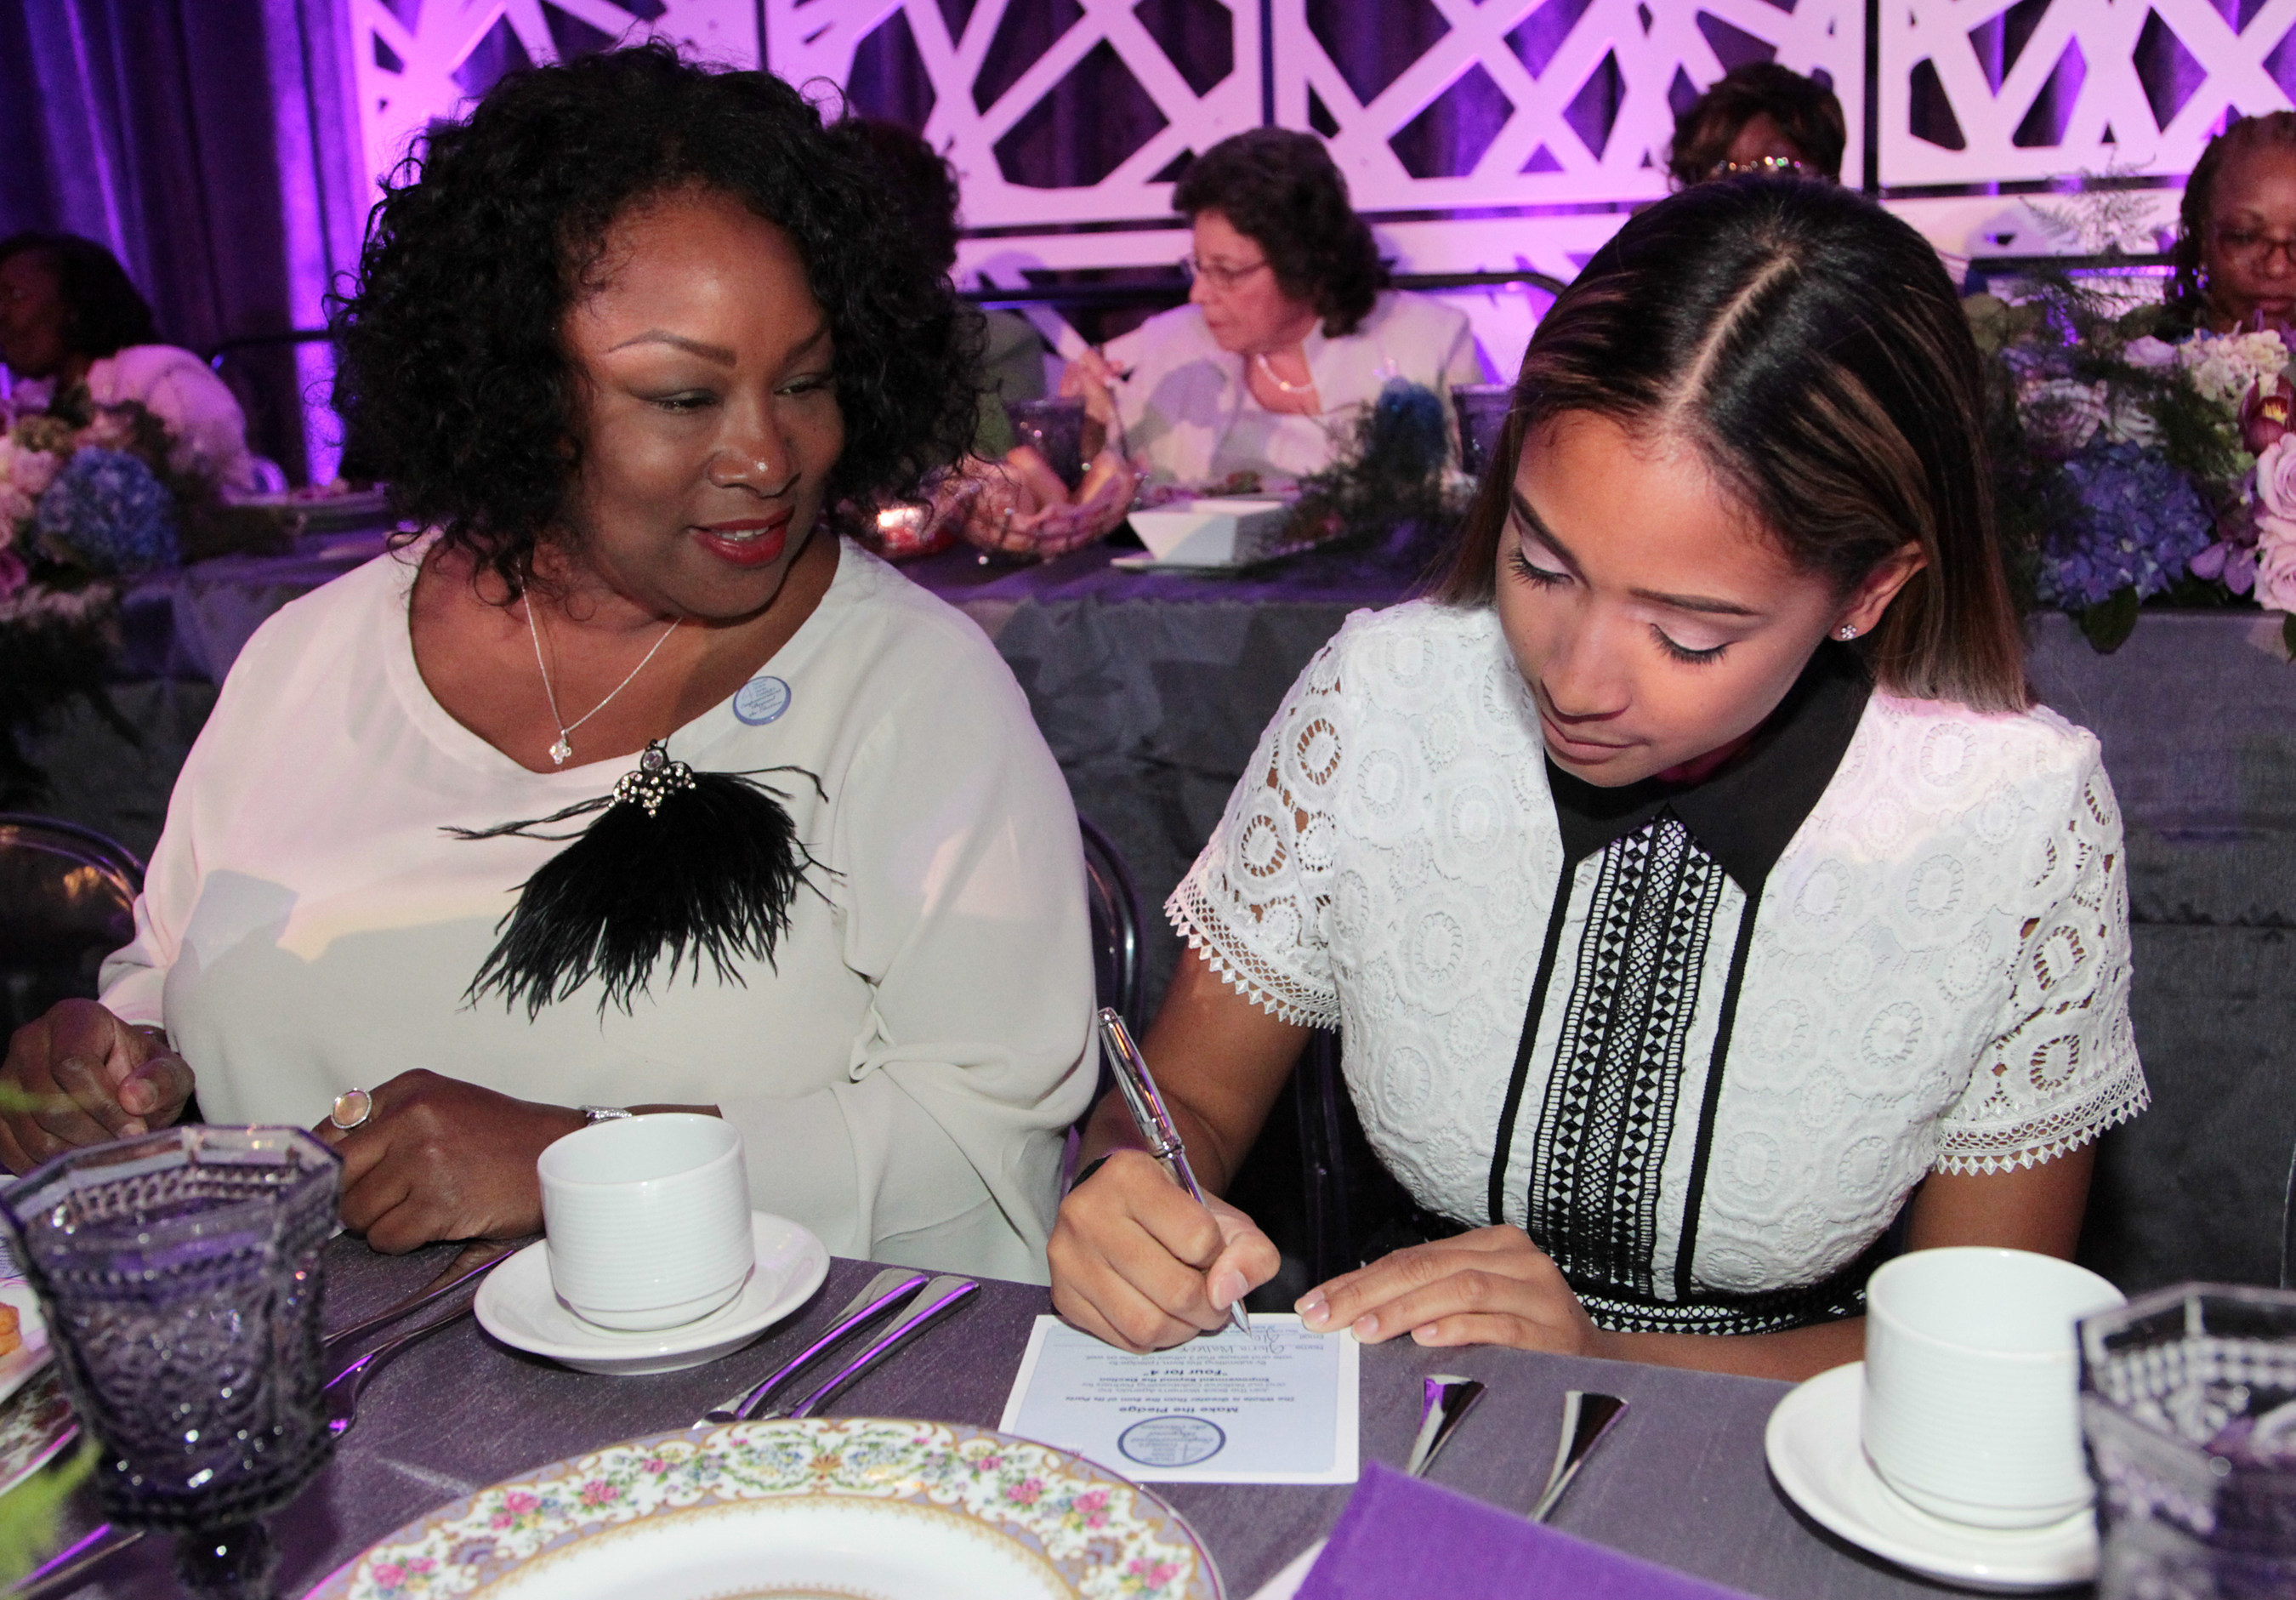 During The Black Women's Agenda, Inc. (BWA) 39th Annual Symposium Awards Luncheon, attendees were encouraged to participate in BWA's "Four For 4" get-out-the-vote initiative by signing pledge cards ensuring that at least four people, including themselves, vote in the November 2016 election. (Paul Morigi/AP Images for The Black Women's Agenda, Inc.)